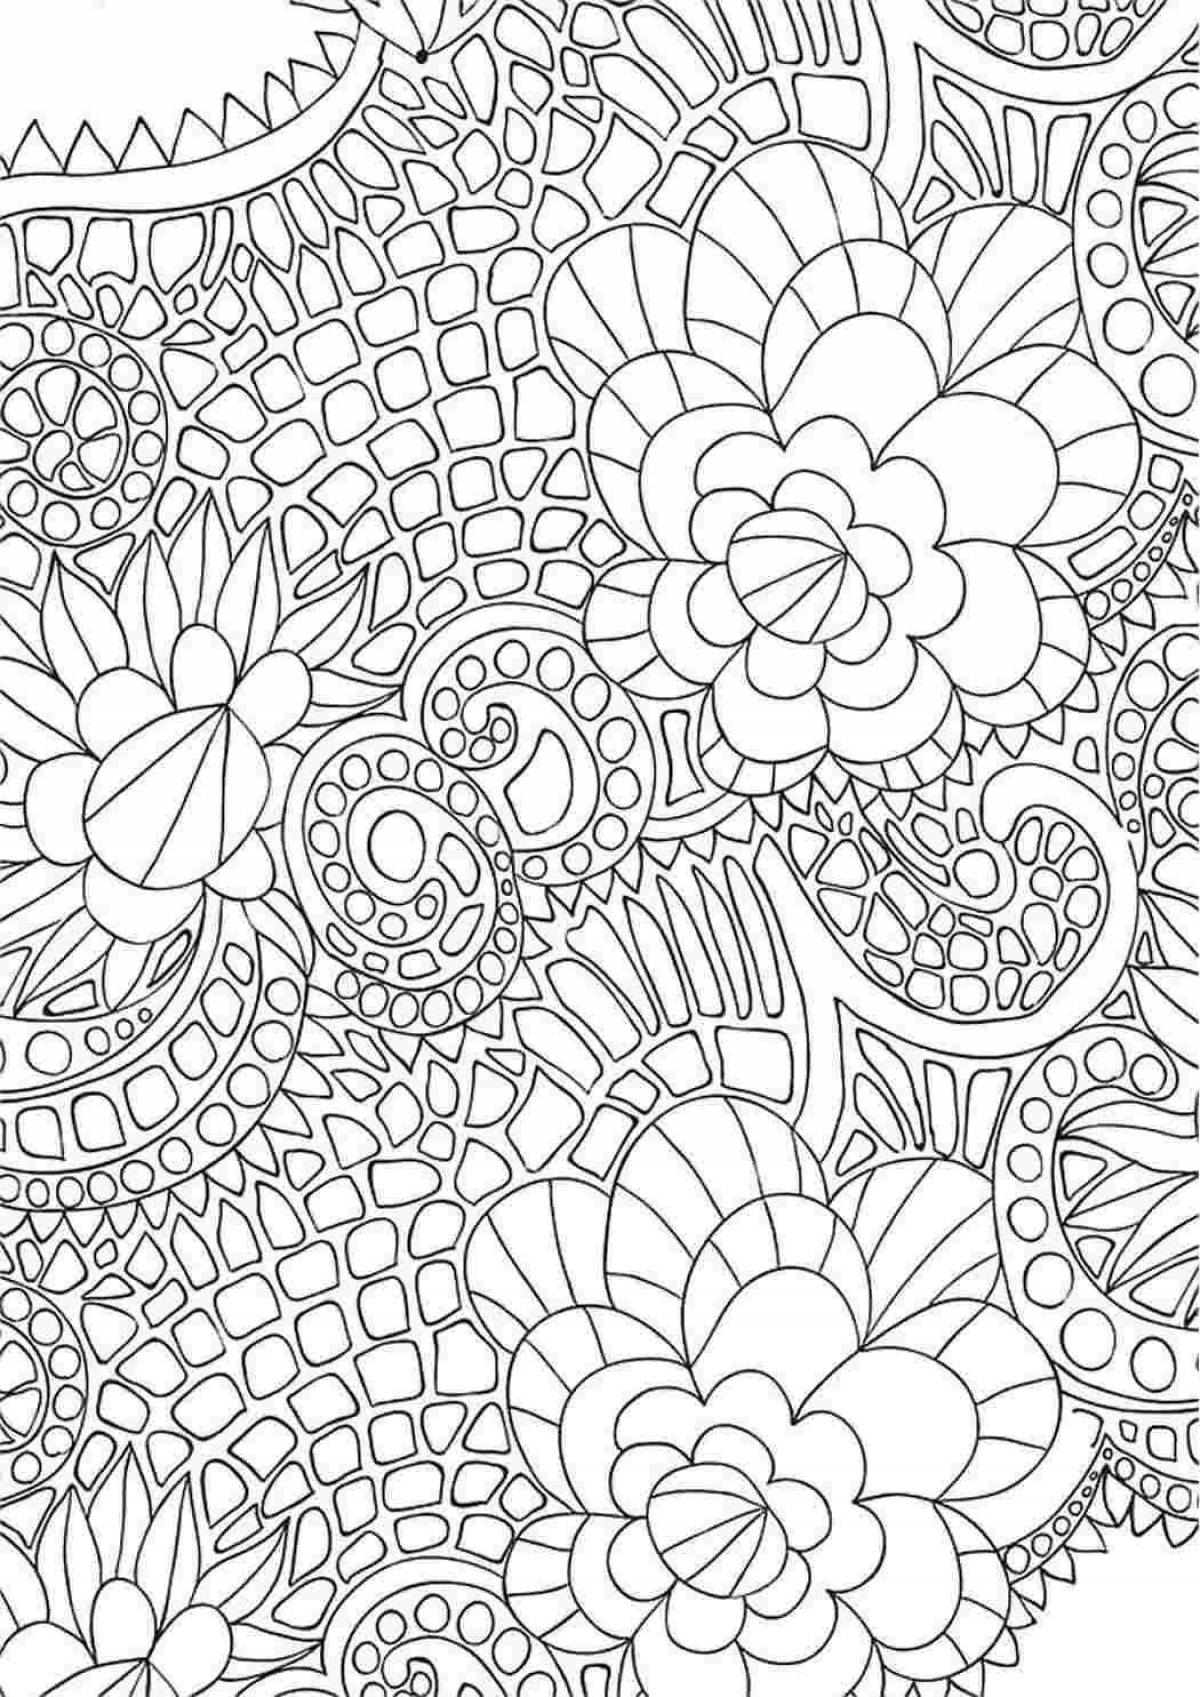 Coloring page with colorful pattern